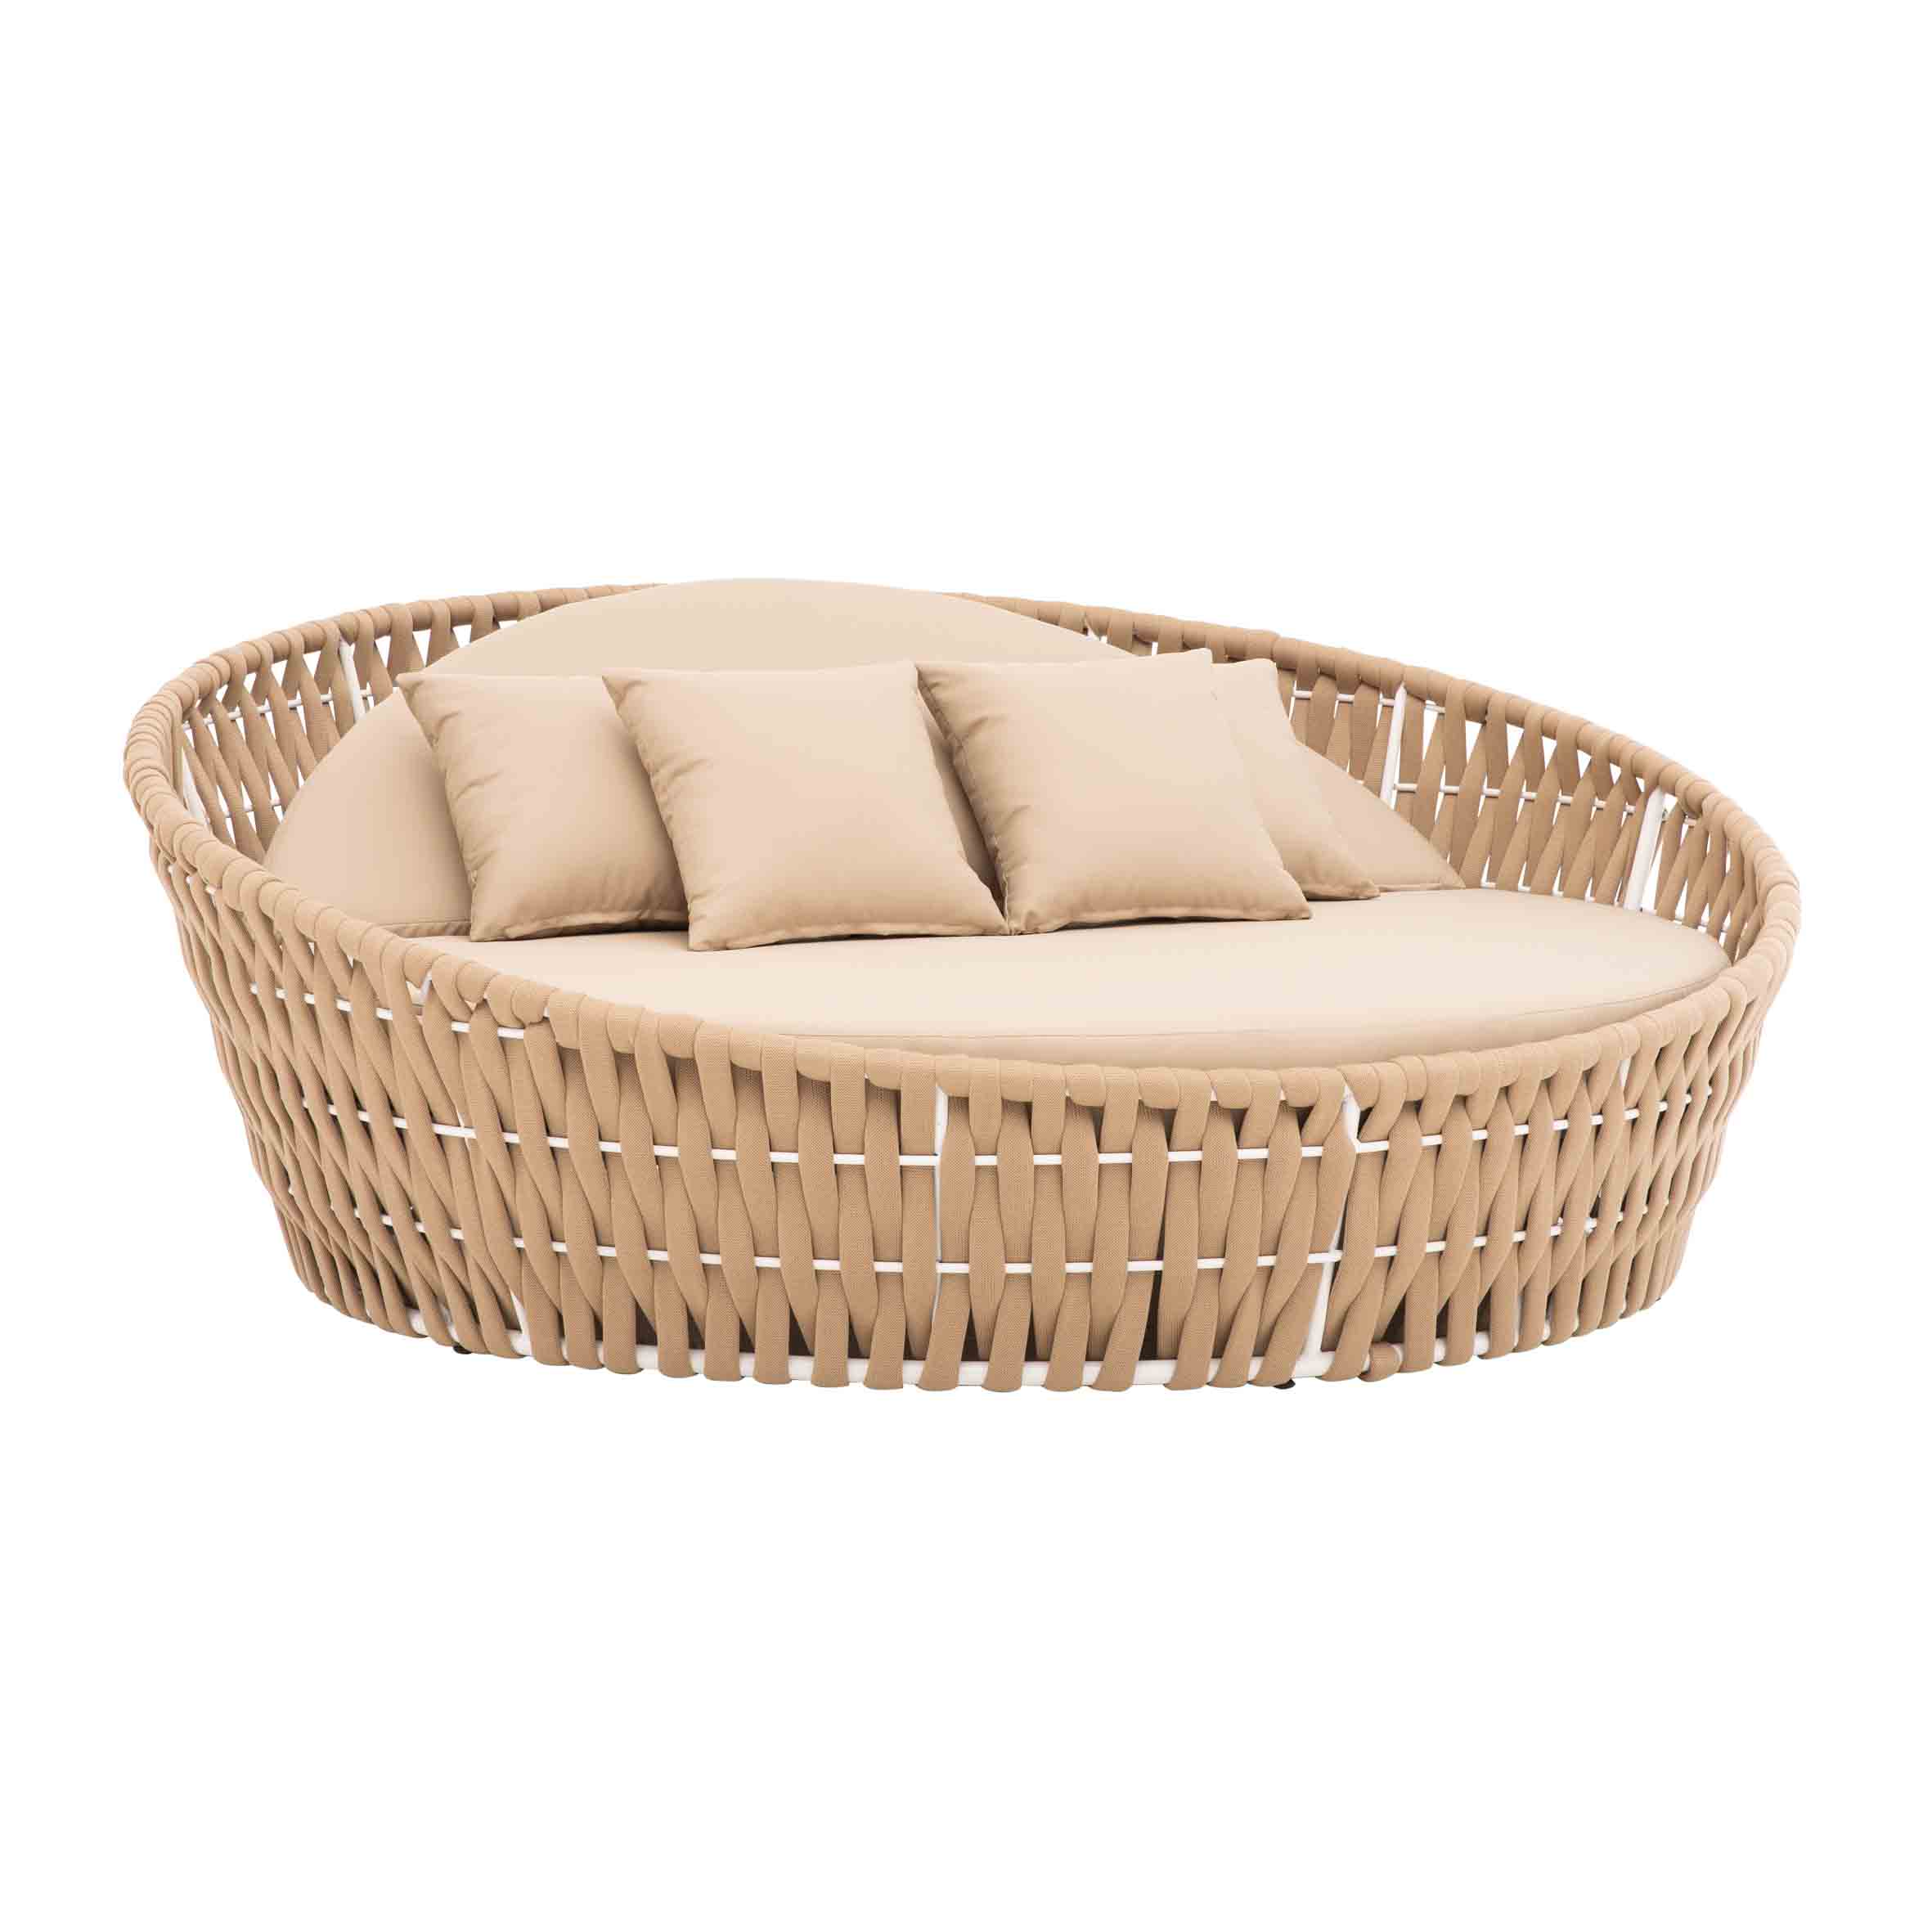 Art rope round daybed S3